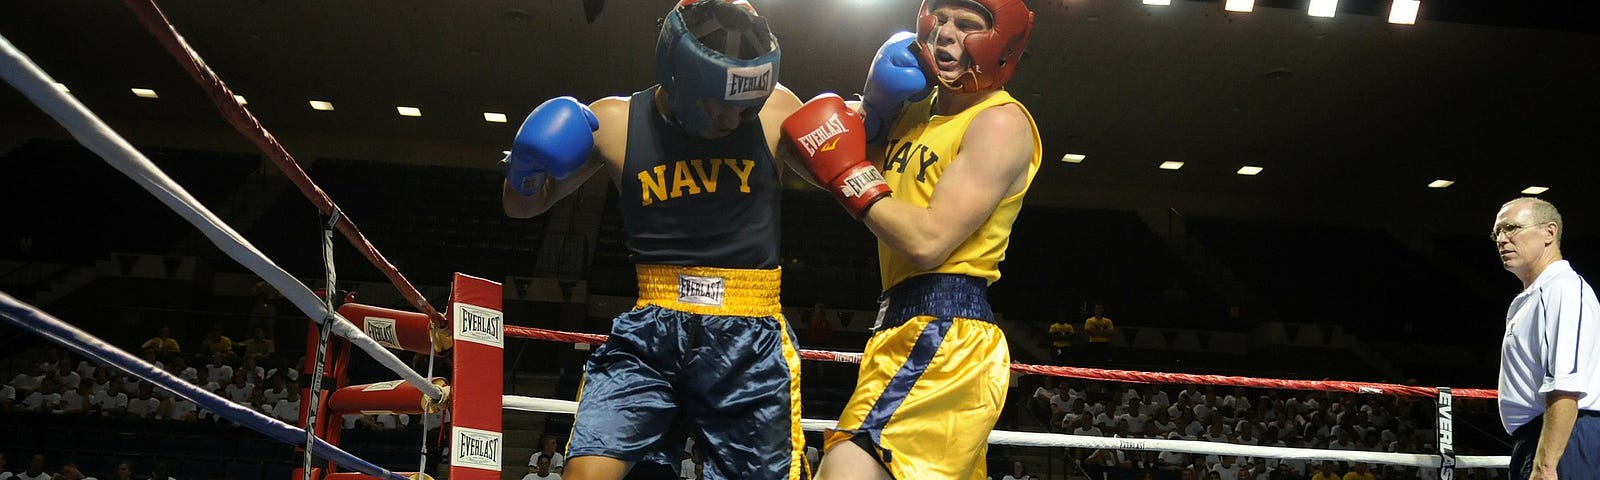 Two boxers fighting in a boxing ring